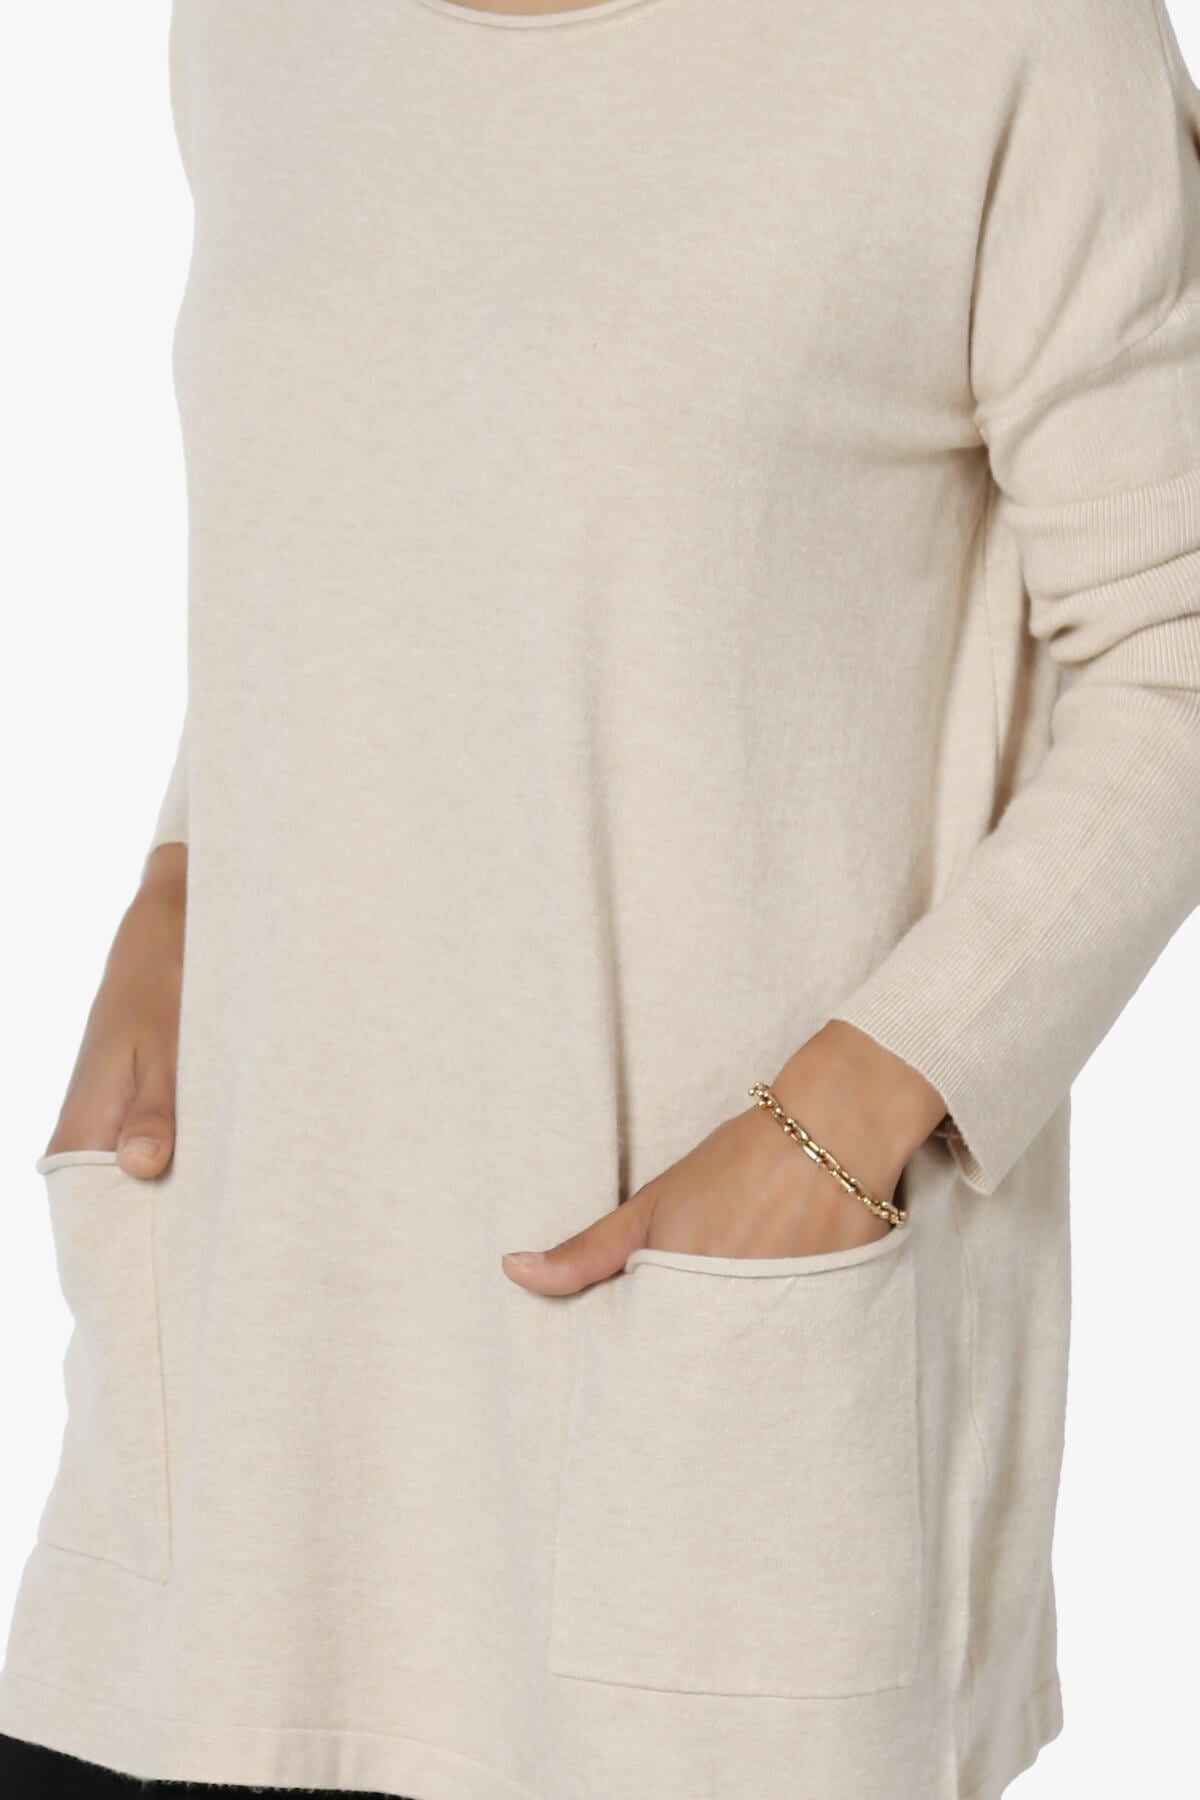 Load image into Gallery viewer, Brecken Pocket Long Sleeve Soft Knit Sweater Tunic HEATHER BEIGE_5
